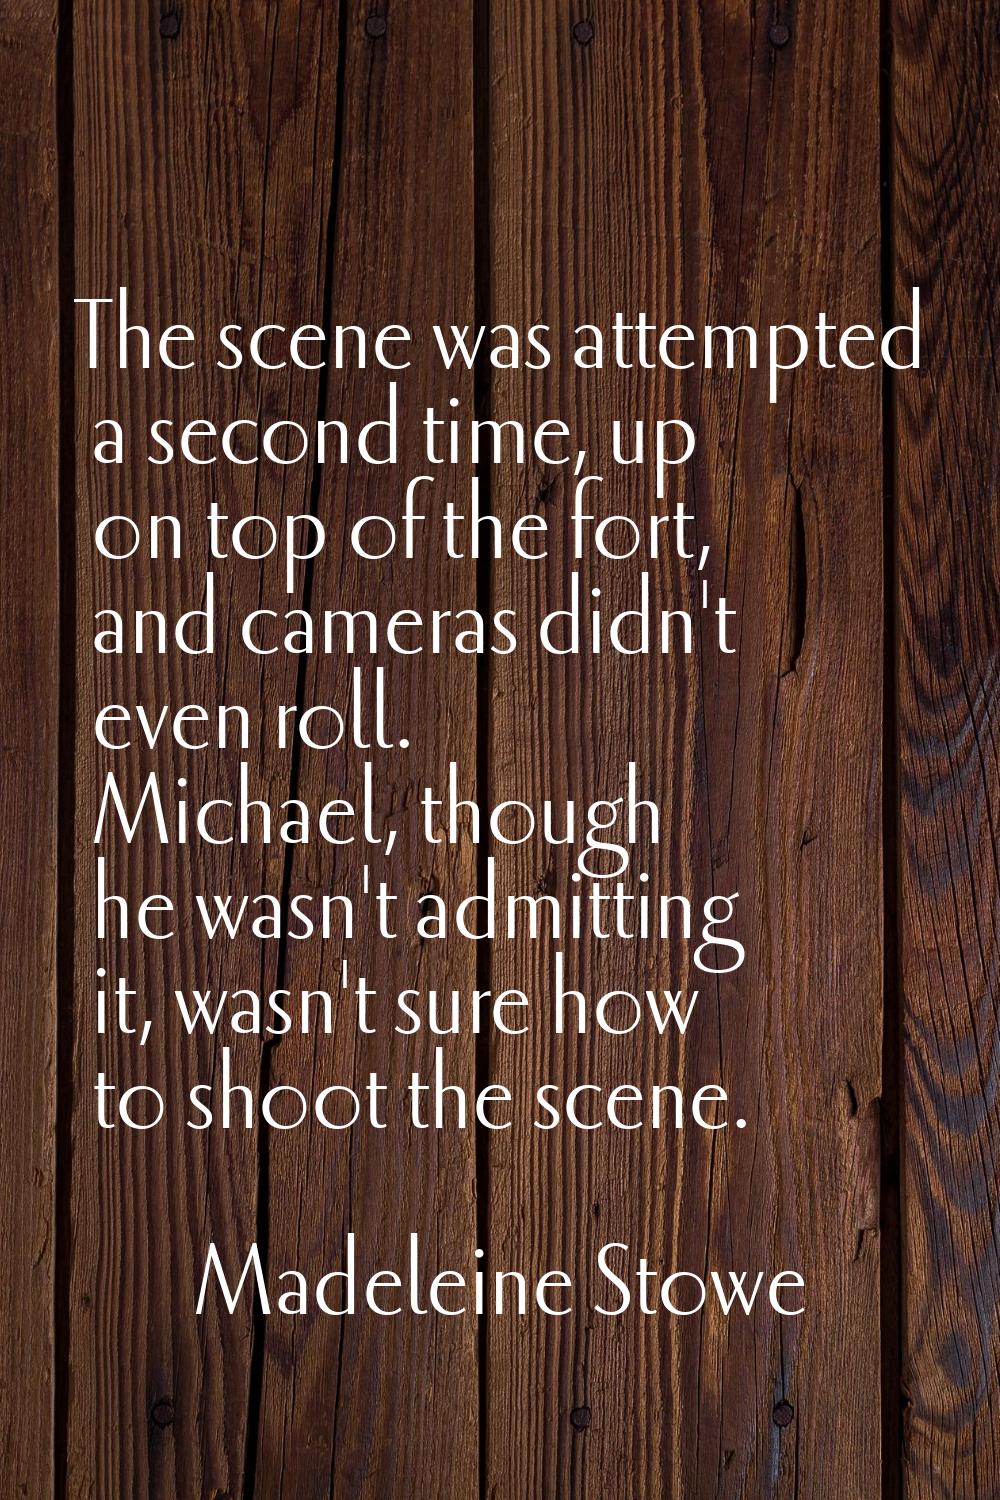 The scene was attempted a second time, up on top of the fort, and cameras didn't even roll. Michael